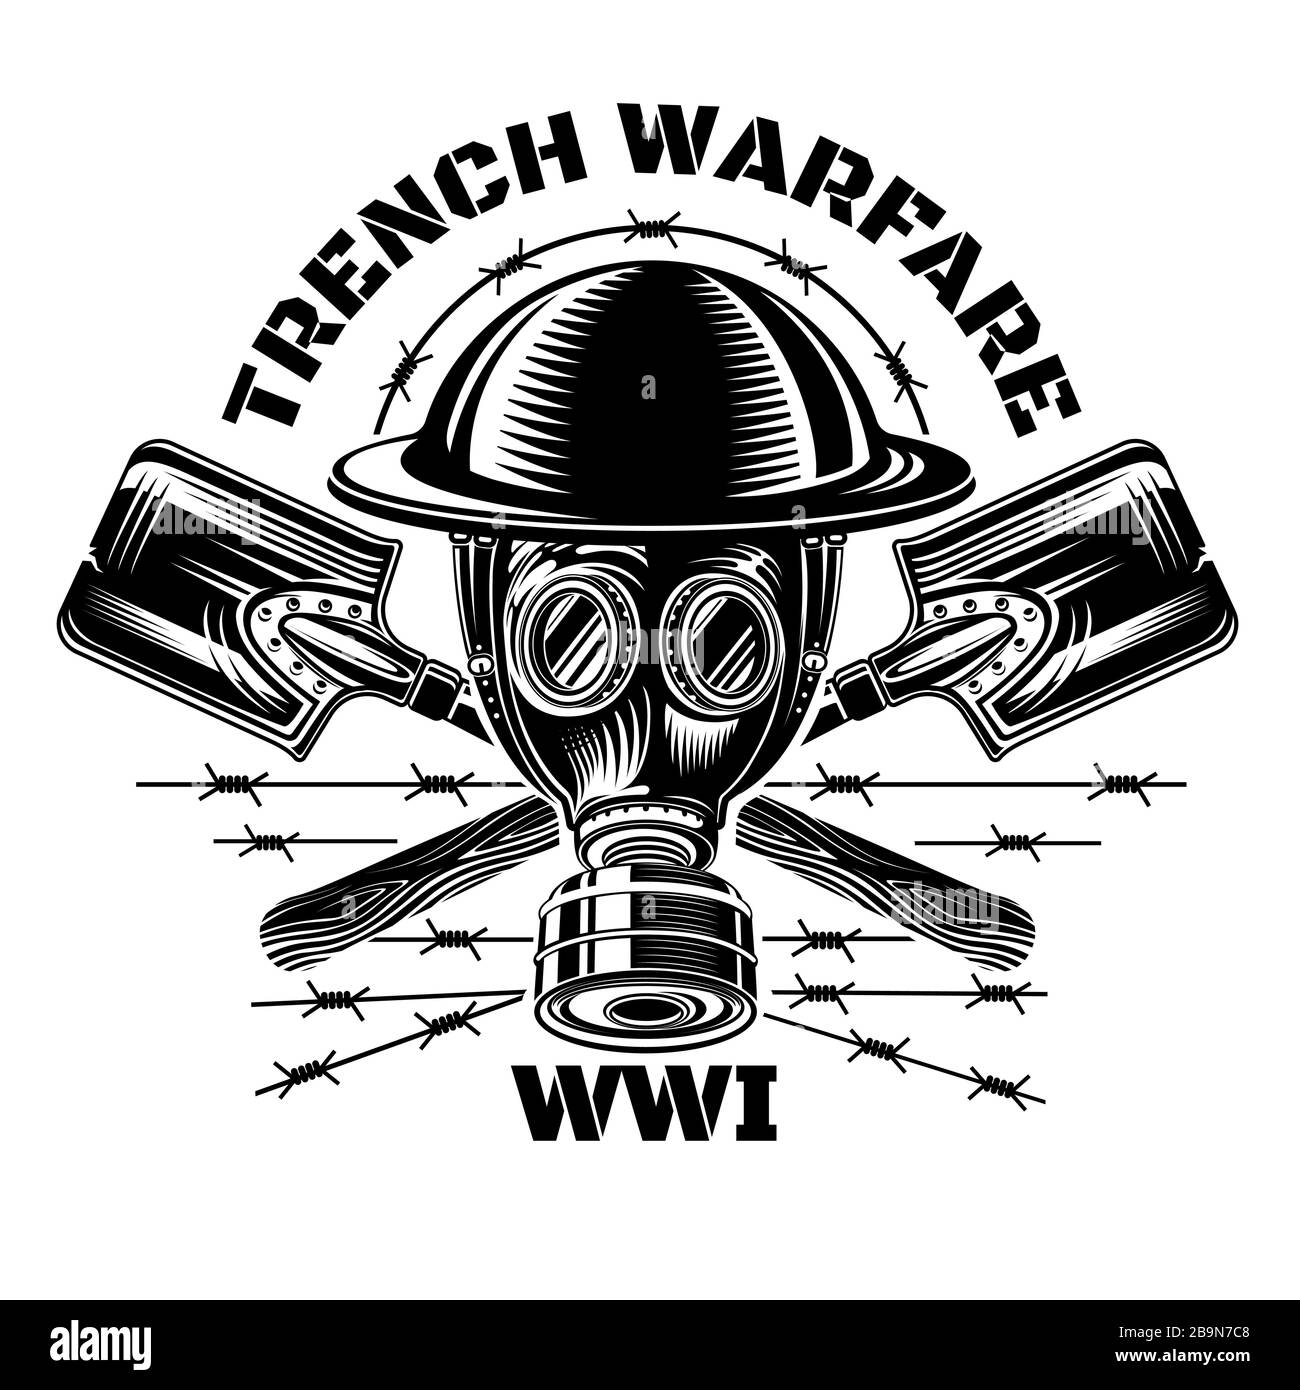 Trench warfare. Gas mask and military helmet with crossed trench showels. Stock Vector